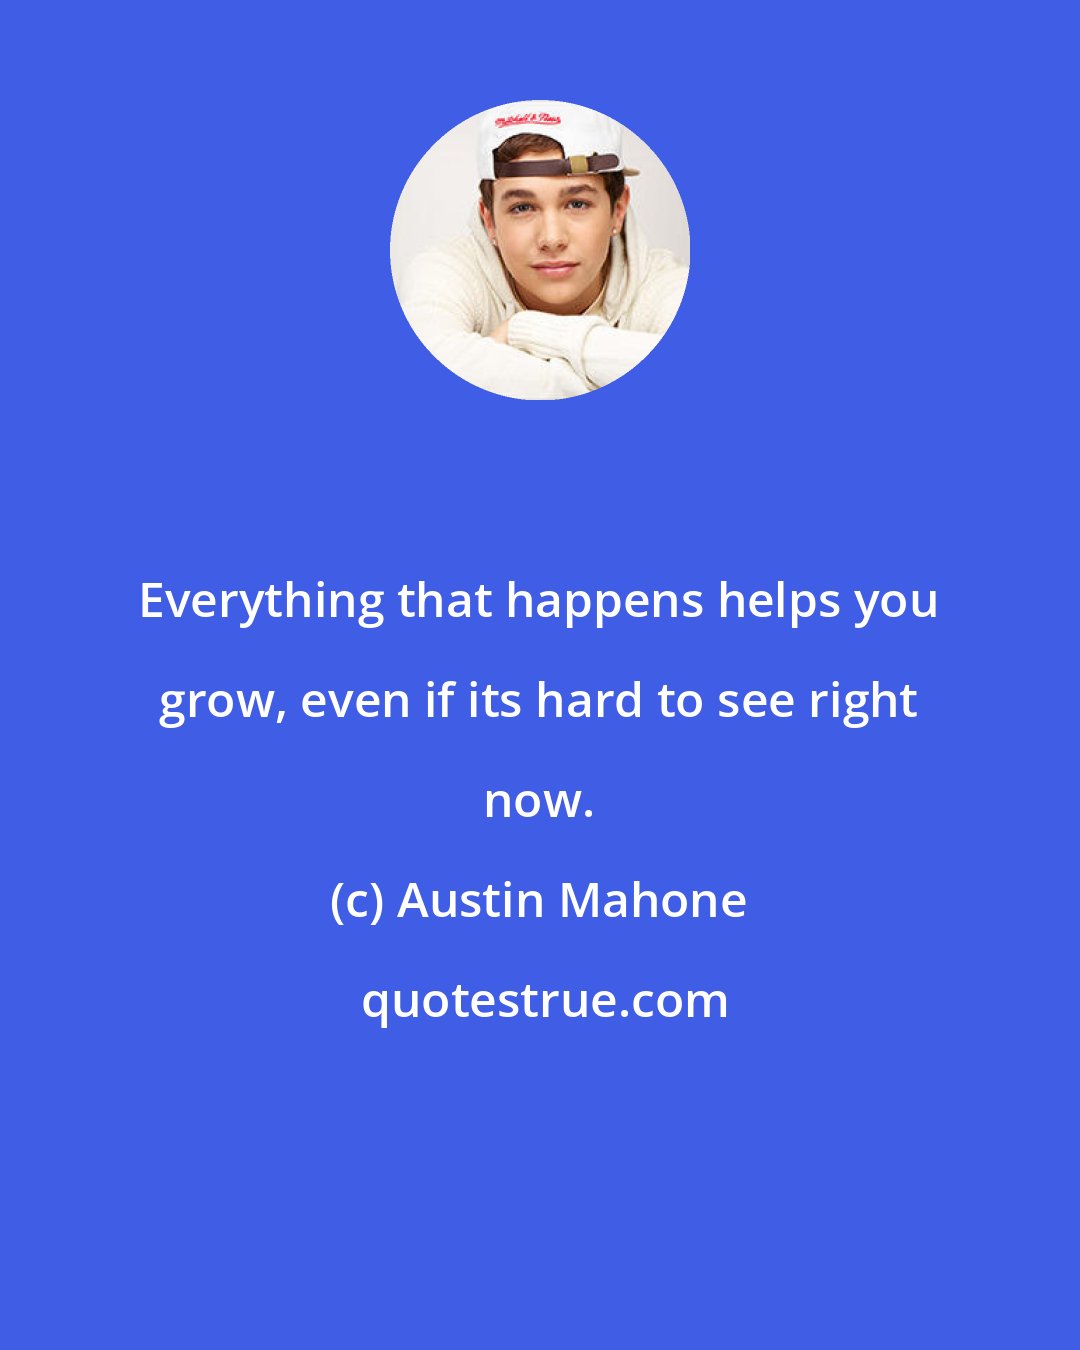 Austin Mahone: Everything that happens helps you grow, even if its hard to see right now.